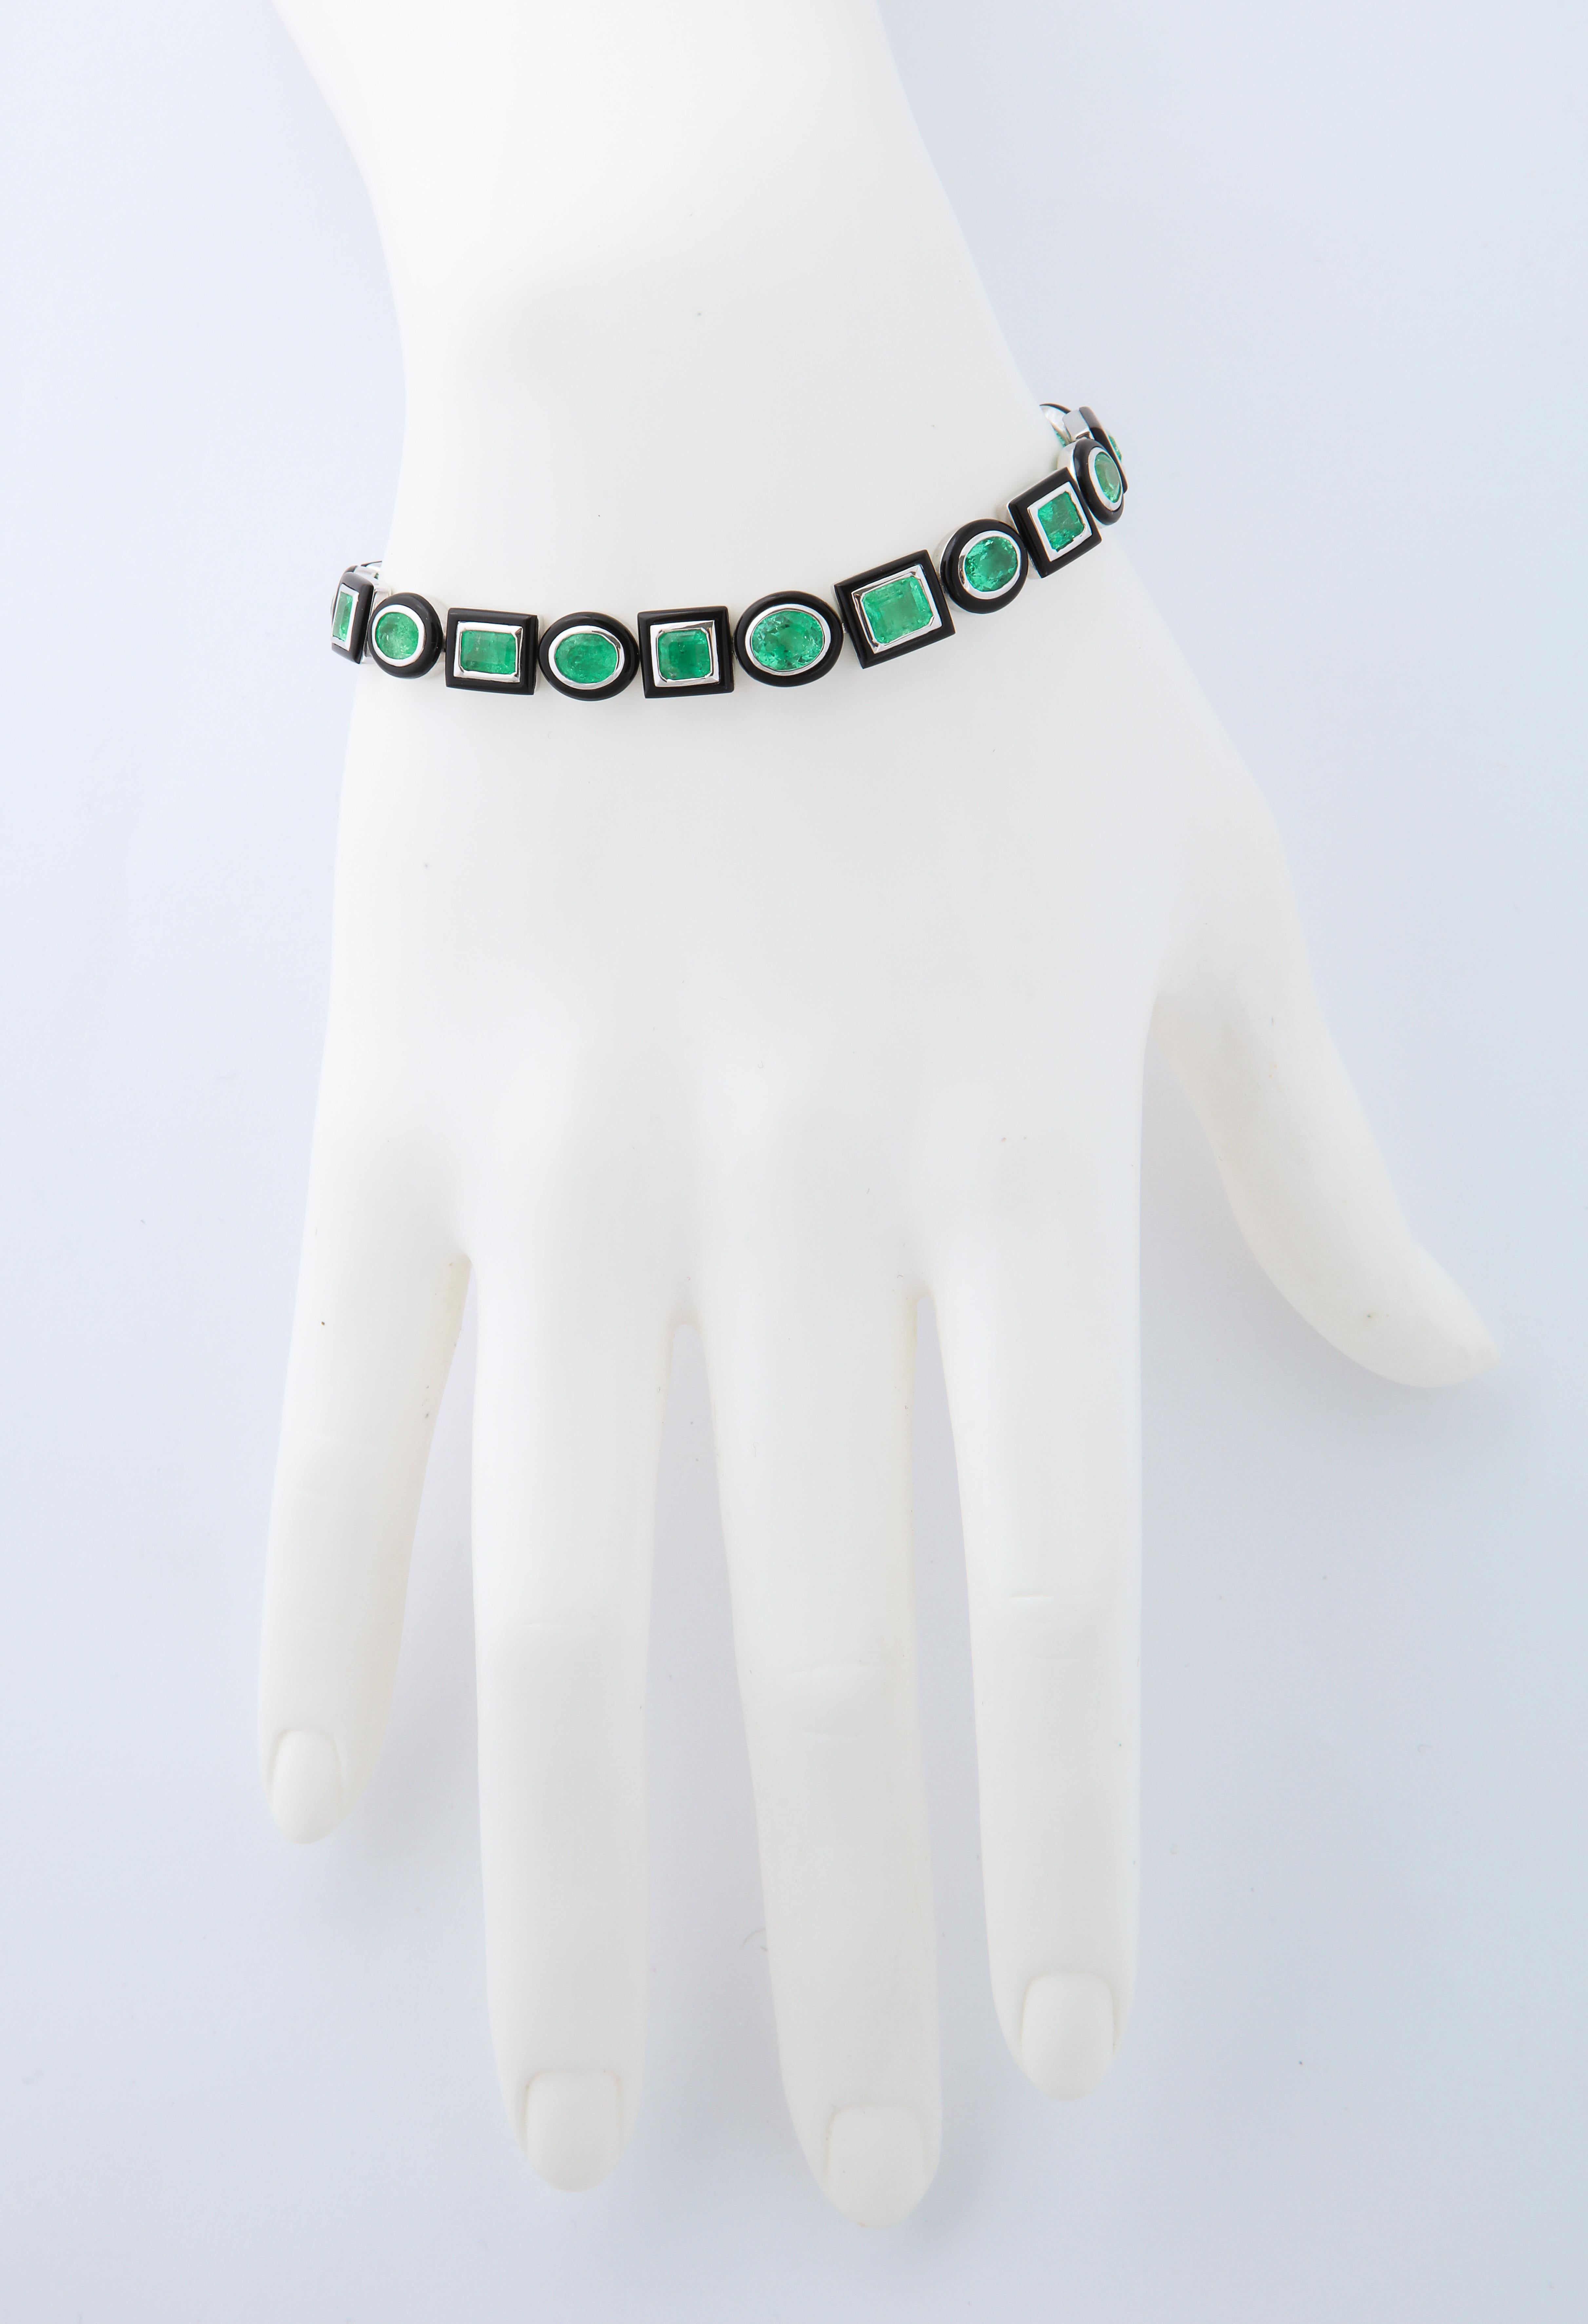 Alternating emerald cut and oval emeralds set in 18kt white gold and framed by hand cut black agate.  The strong colors and sharp contrast create a dramatic new take on a tennis bracelet.  Versatile to be worn in casual and more elegant settings.
21